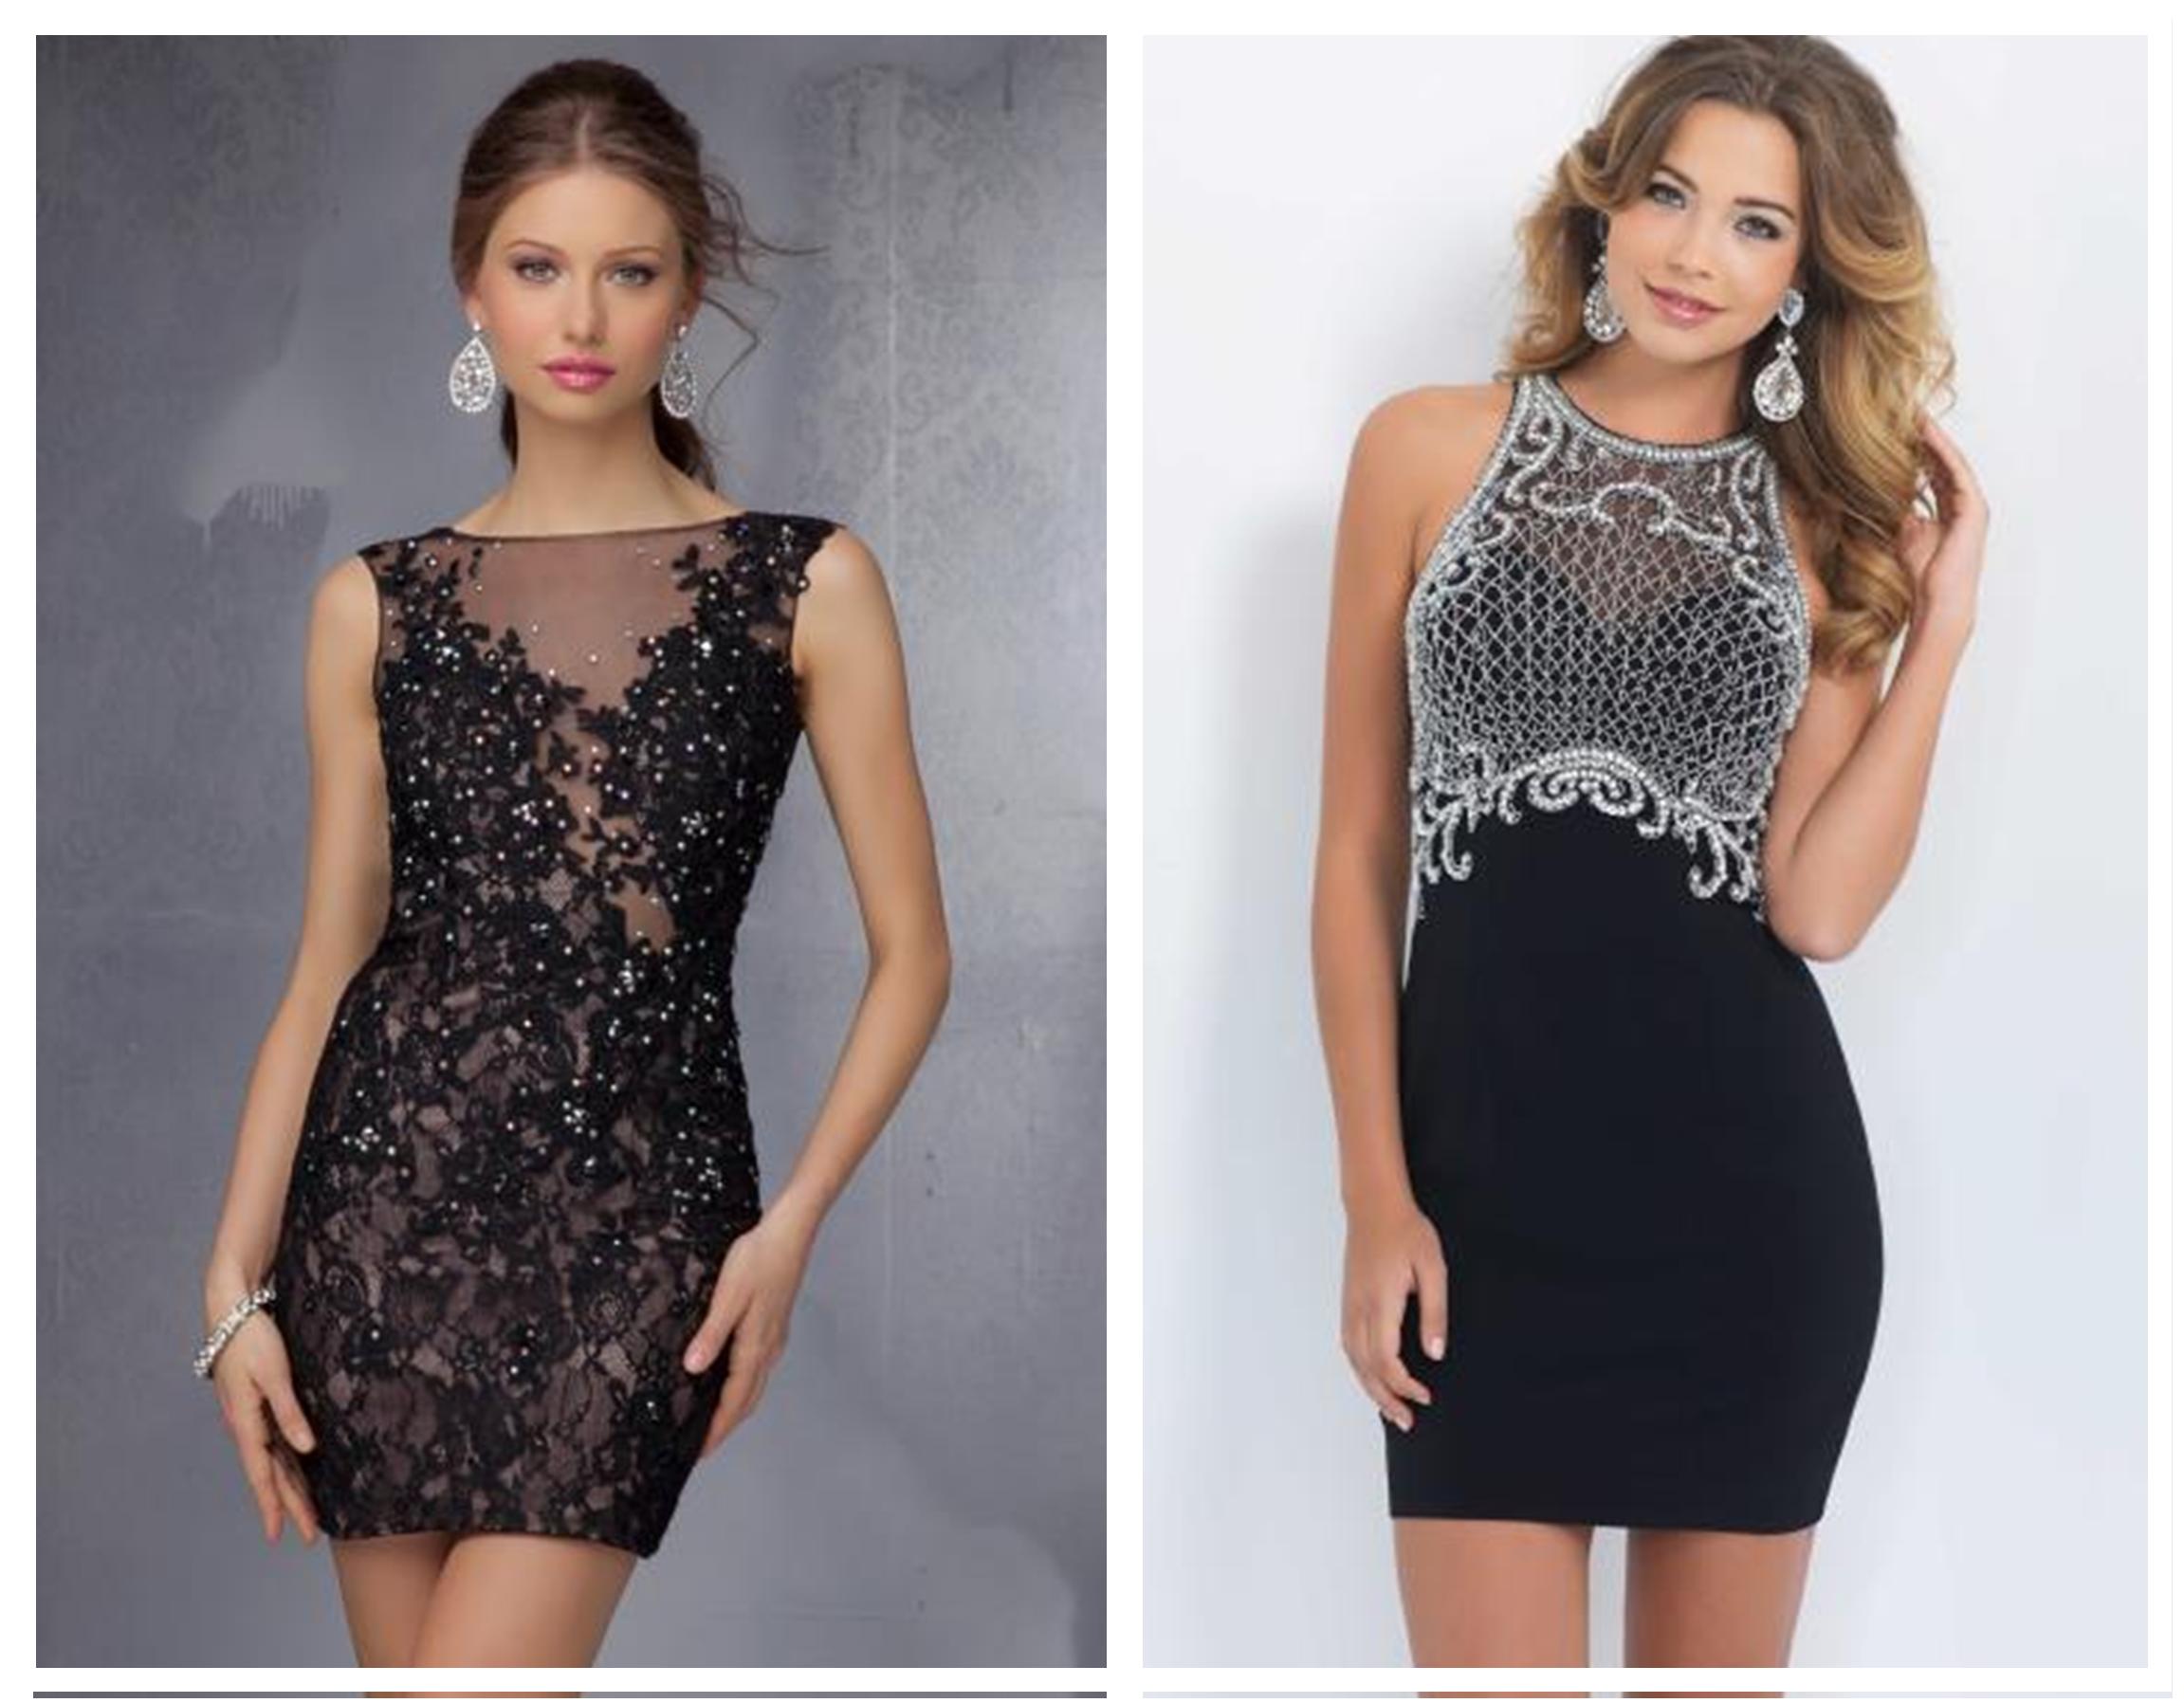 https://cassiefairy.com/wp-content/uploads/2015/10/fitted-party-dress-for-petite-body-shape.jpg